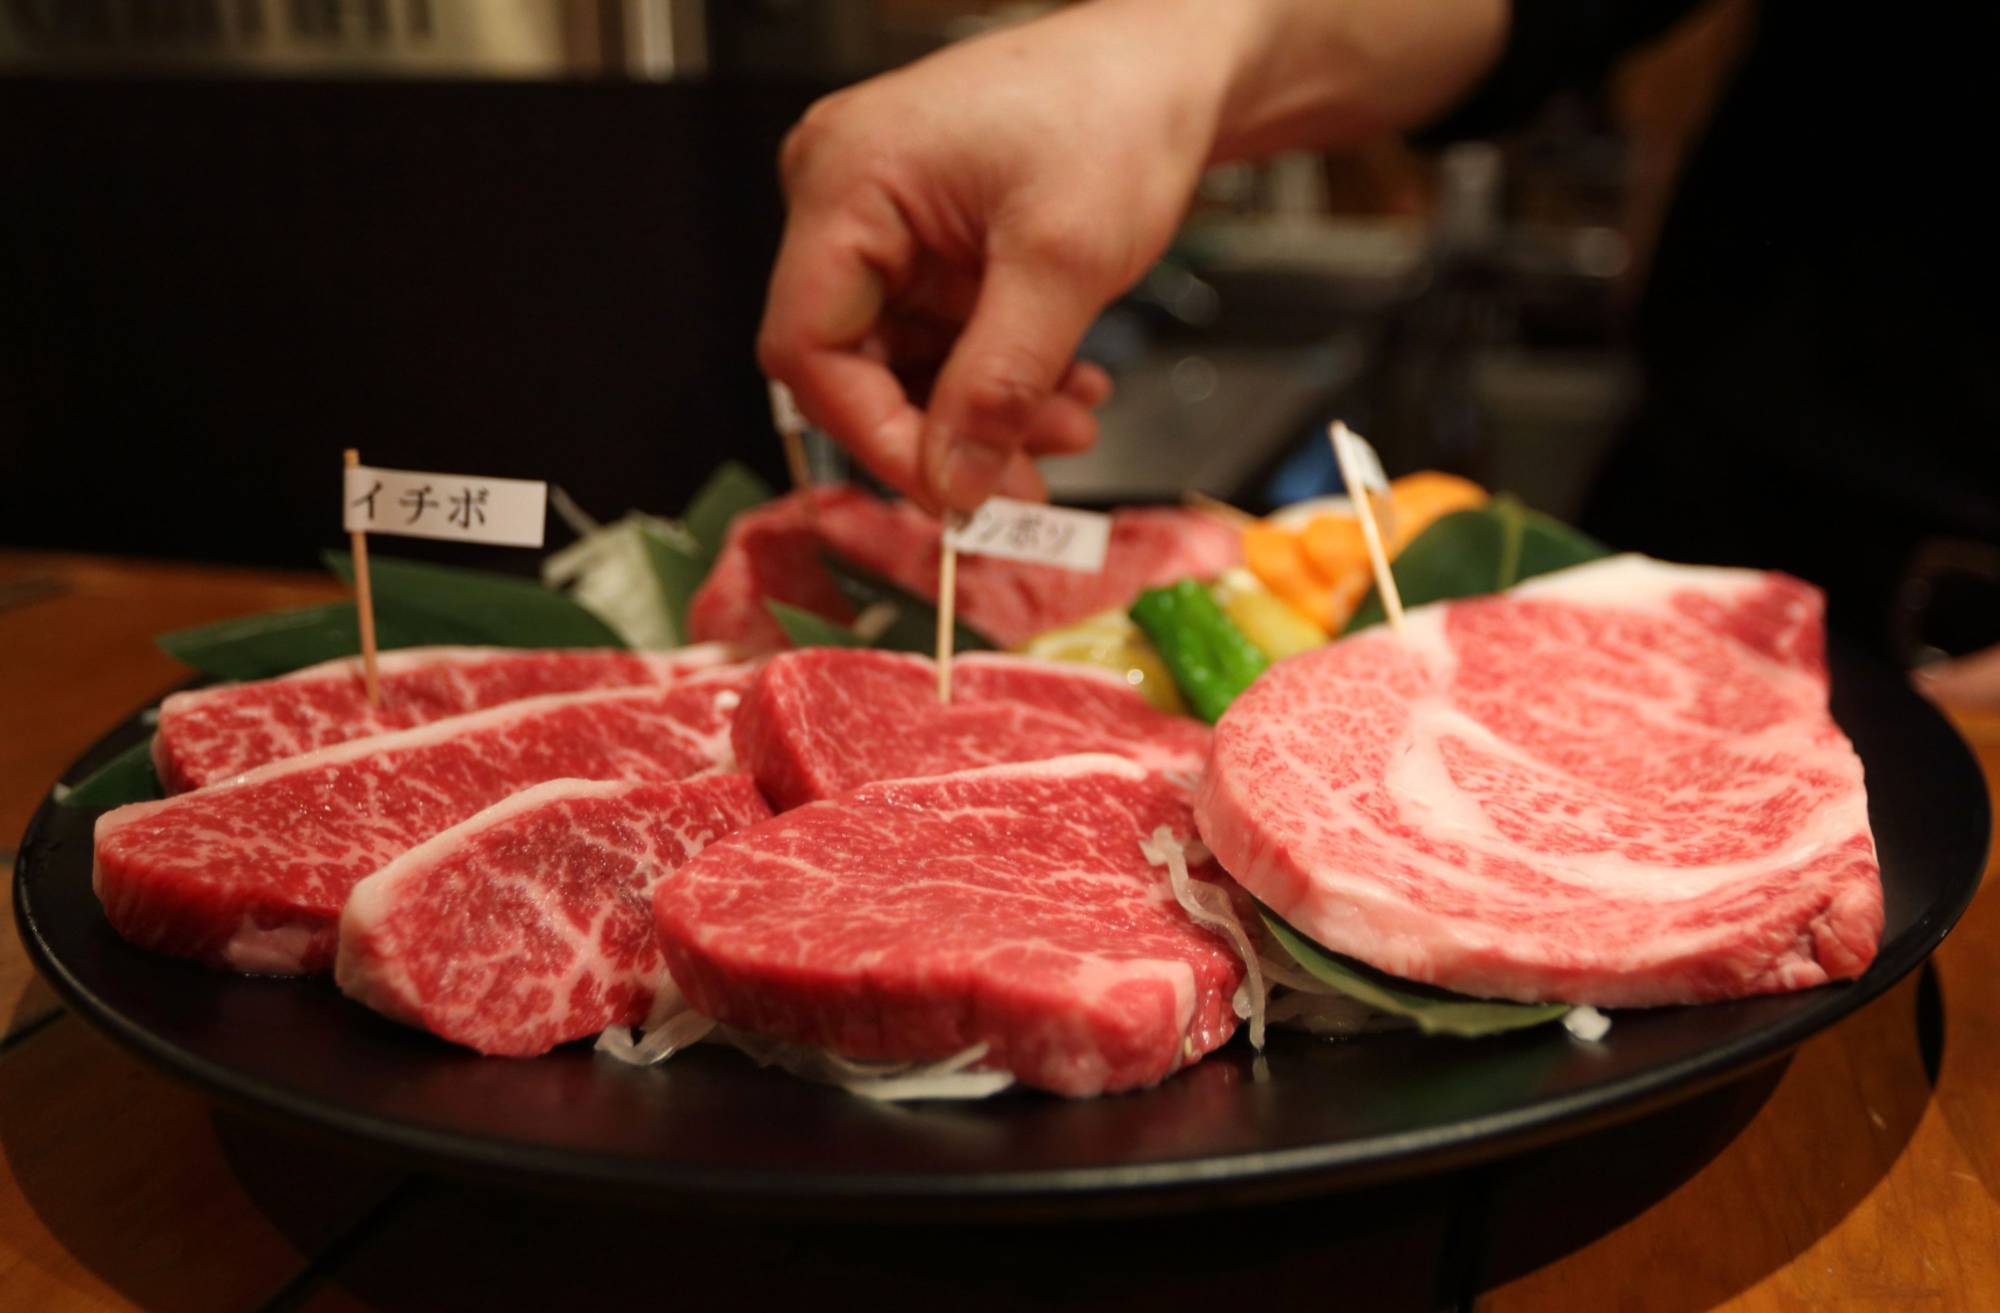 What Japan's iconic beef can teach us about 'soft power' - The